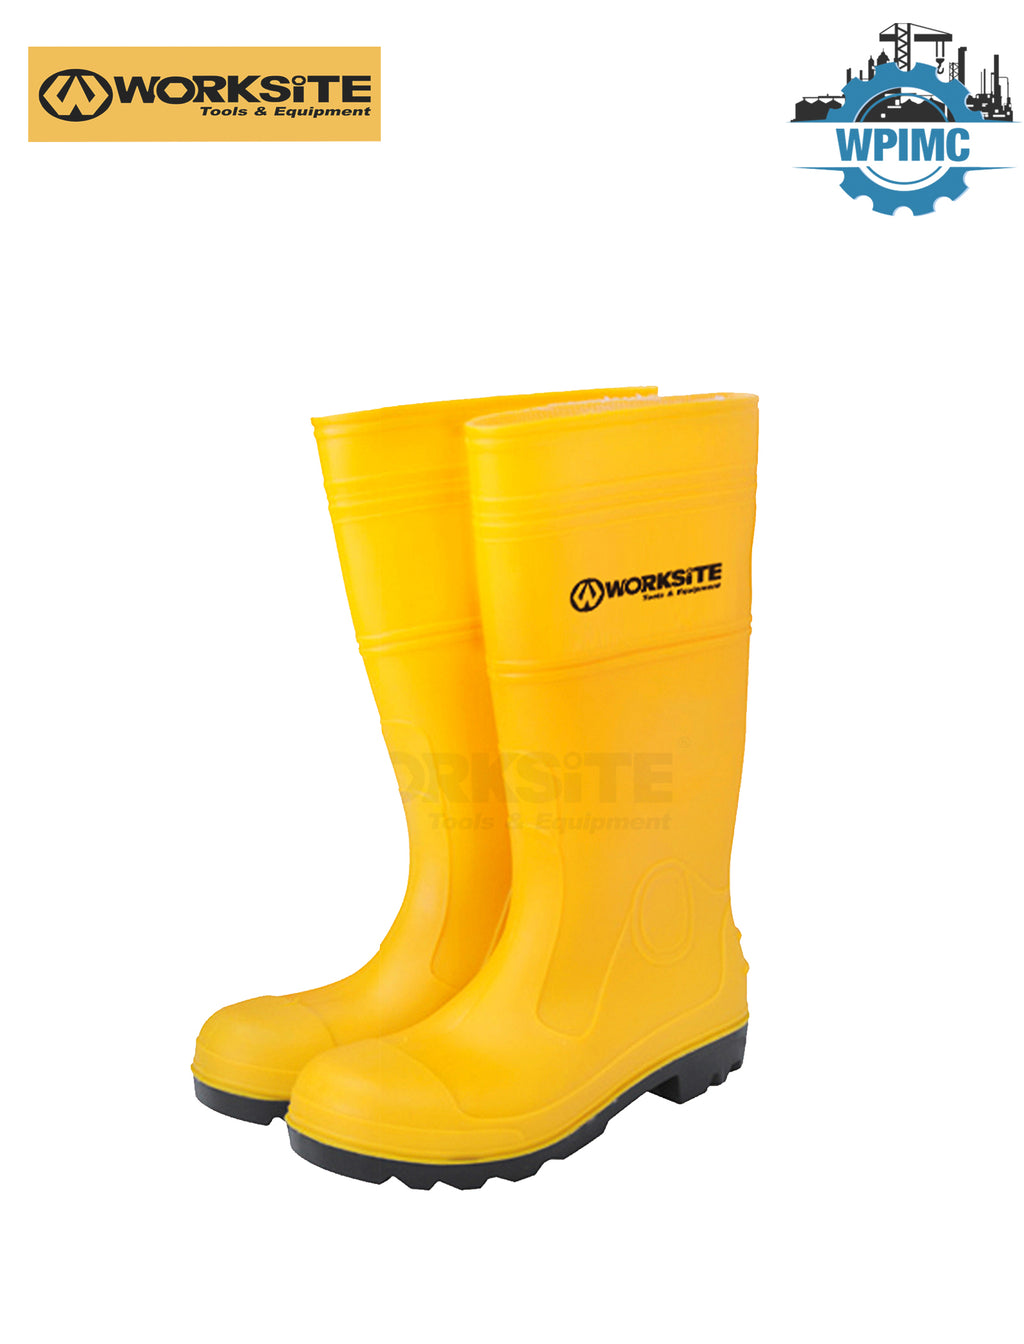 WORKSITE SAFETY BOOTS WT8301